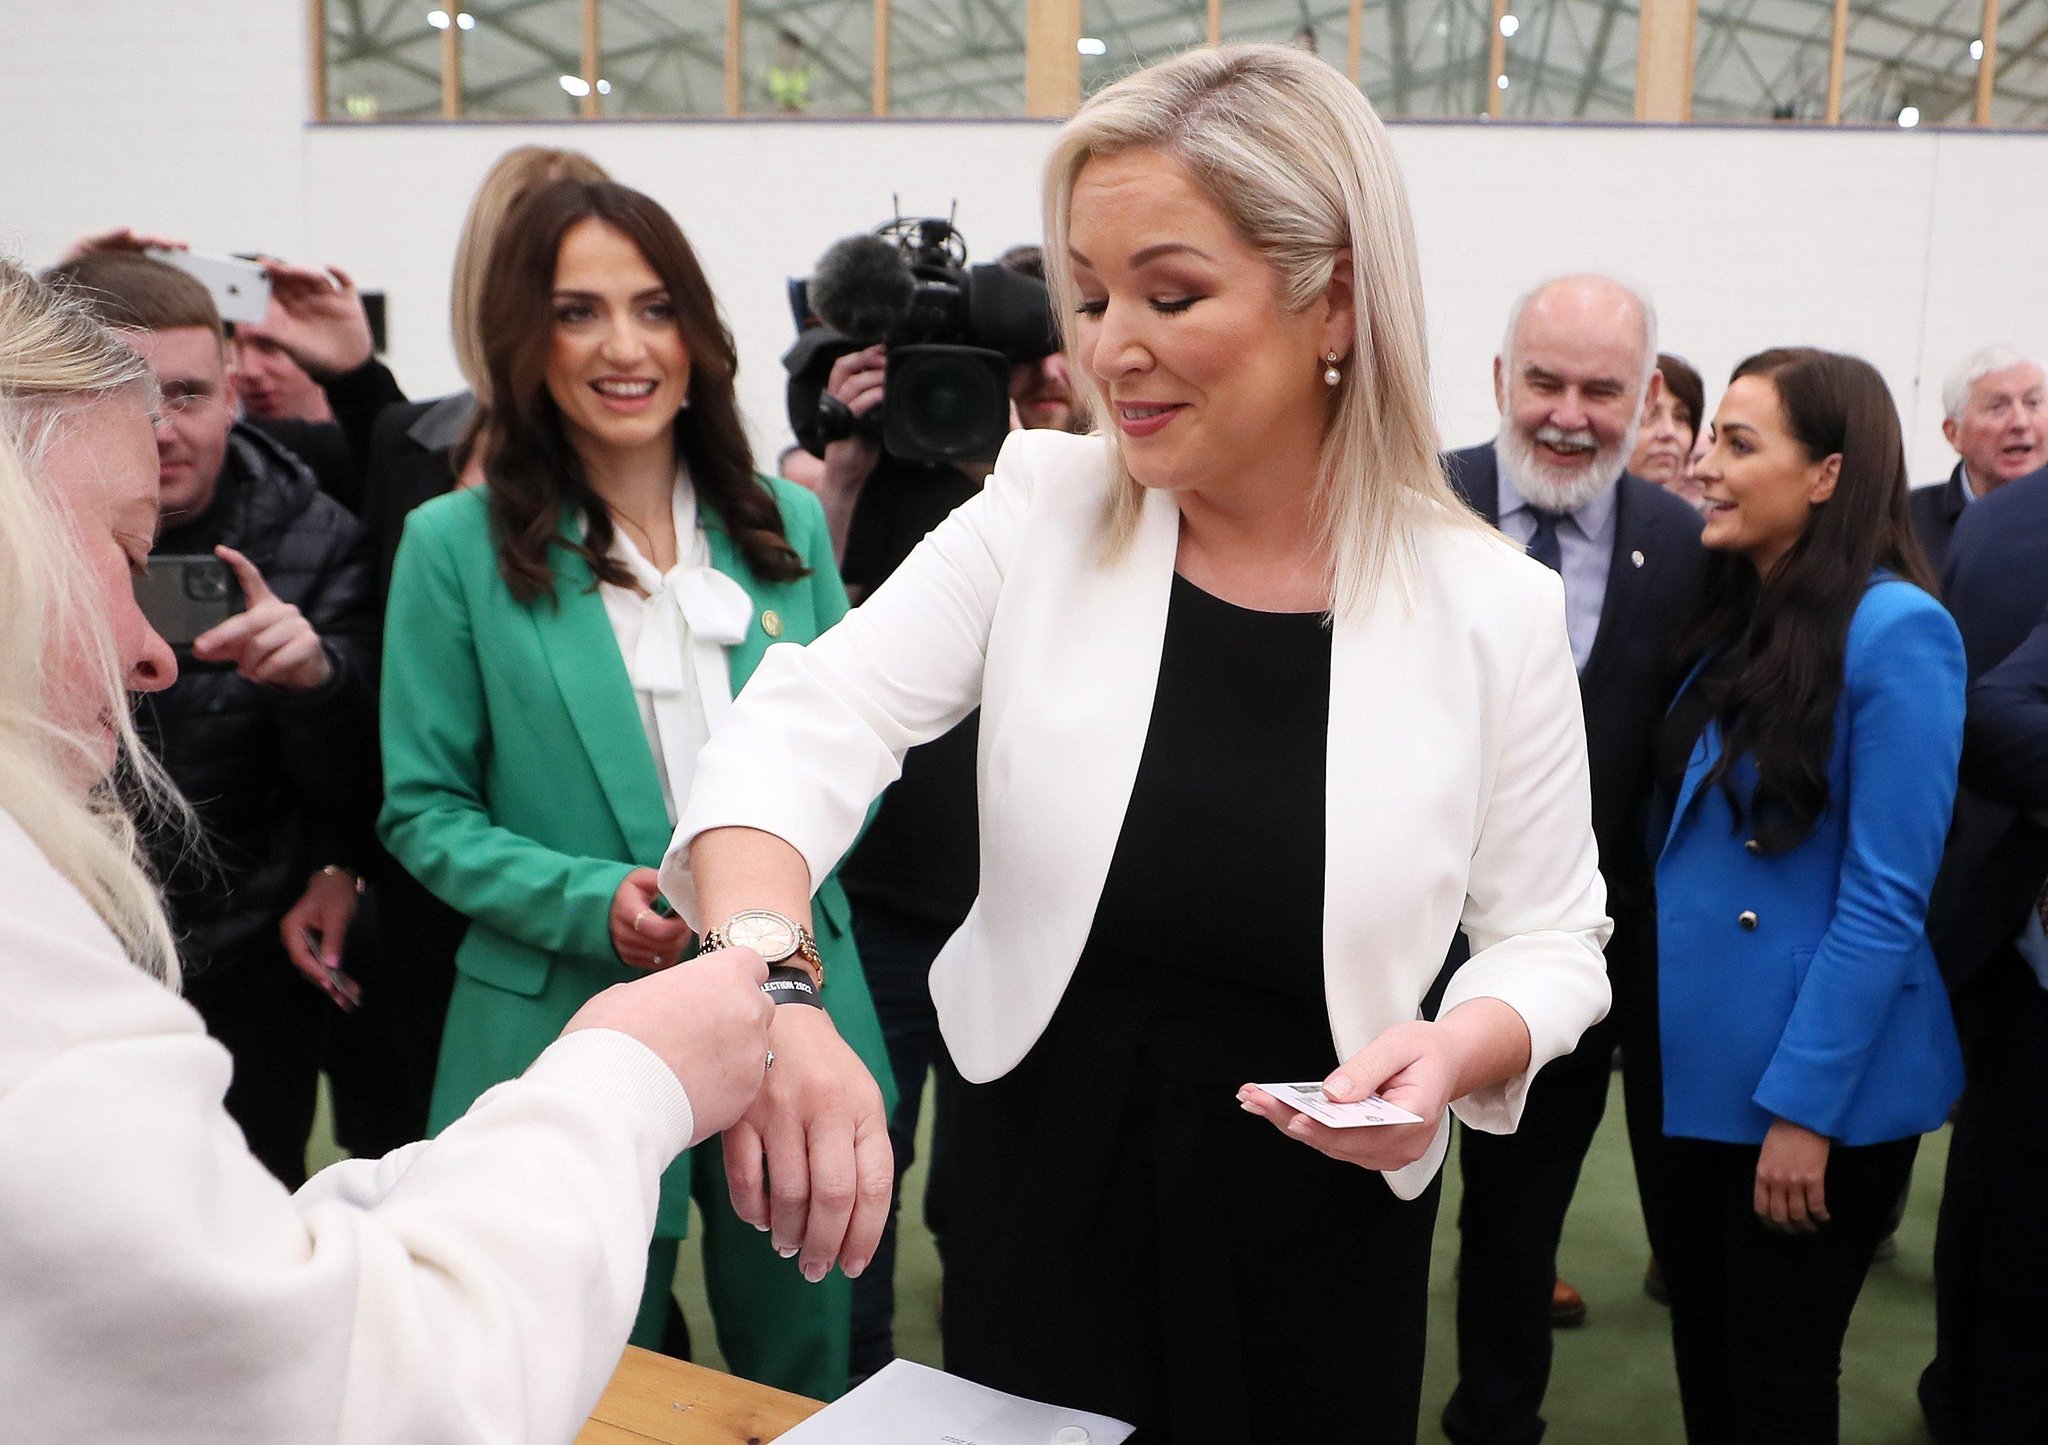 Election 2022:Michelle O'Neill appears upbeat but says it's 'very early days'